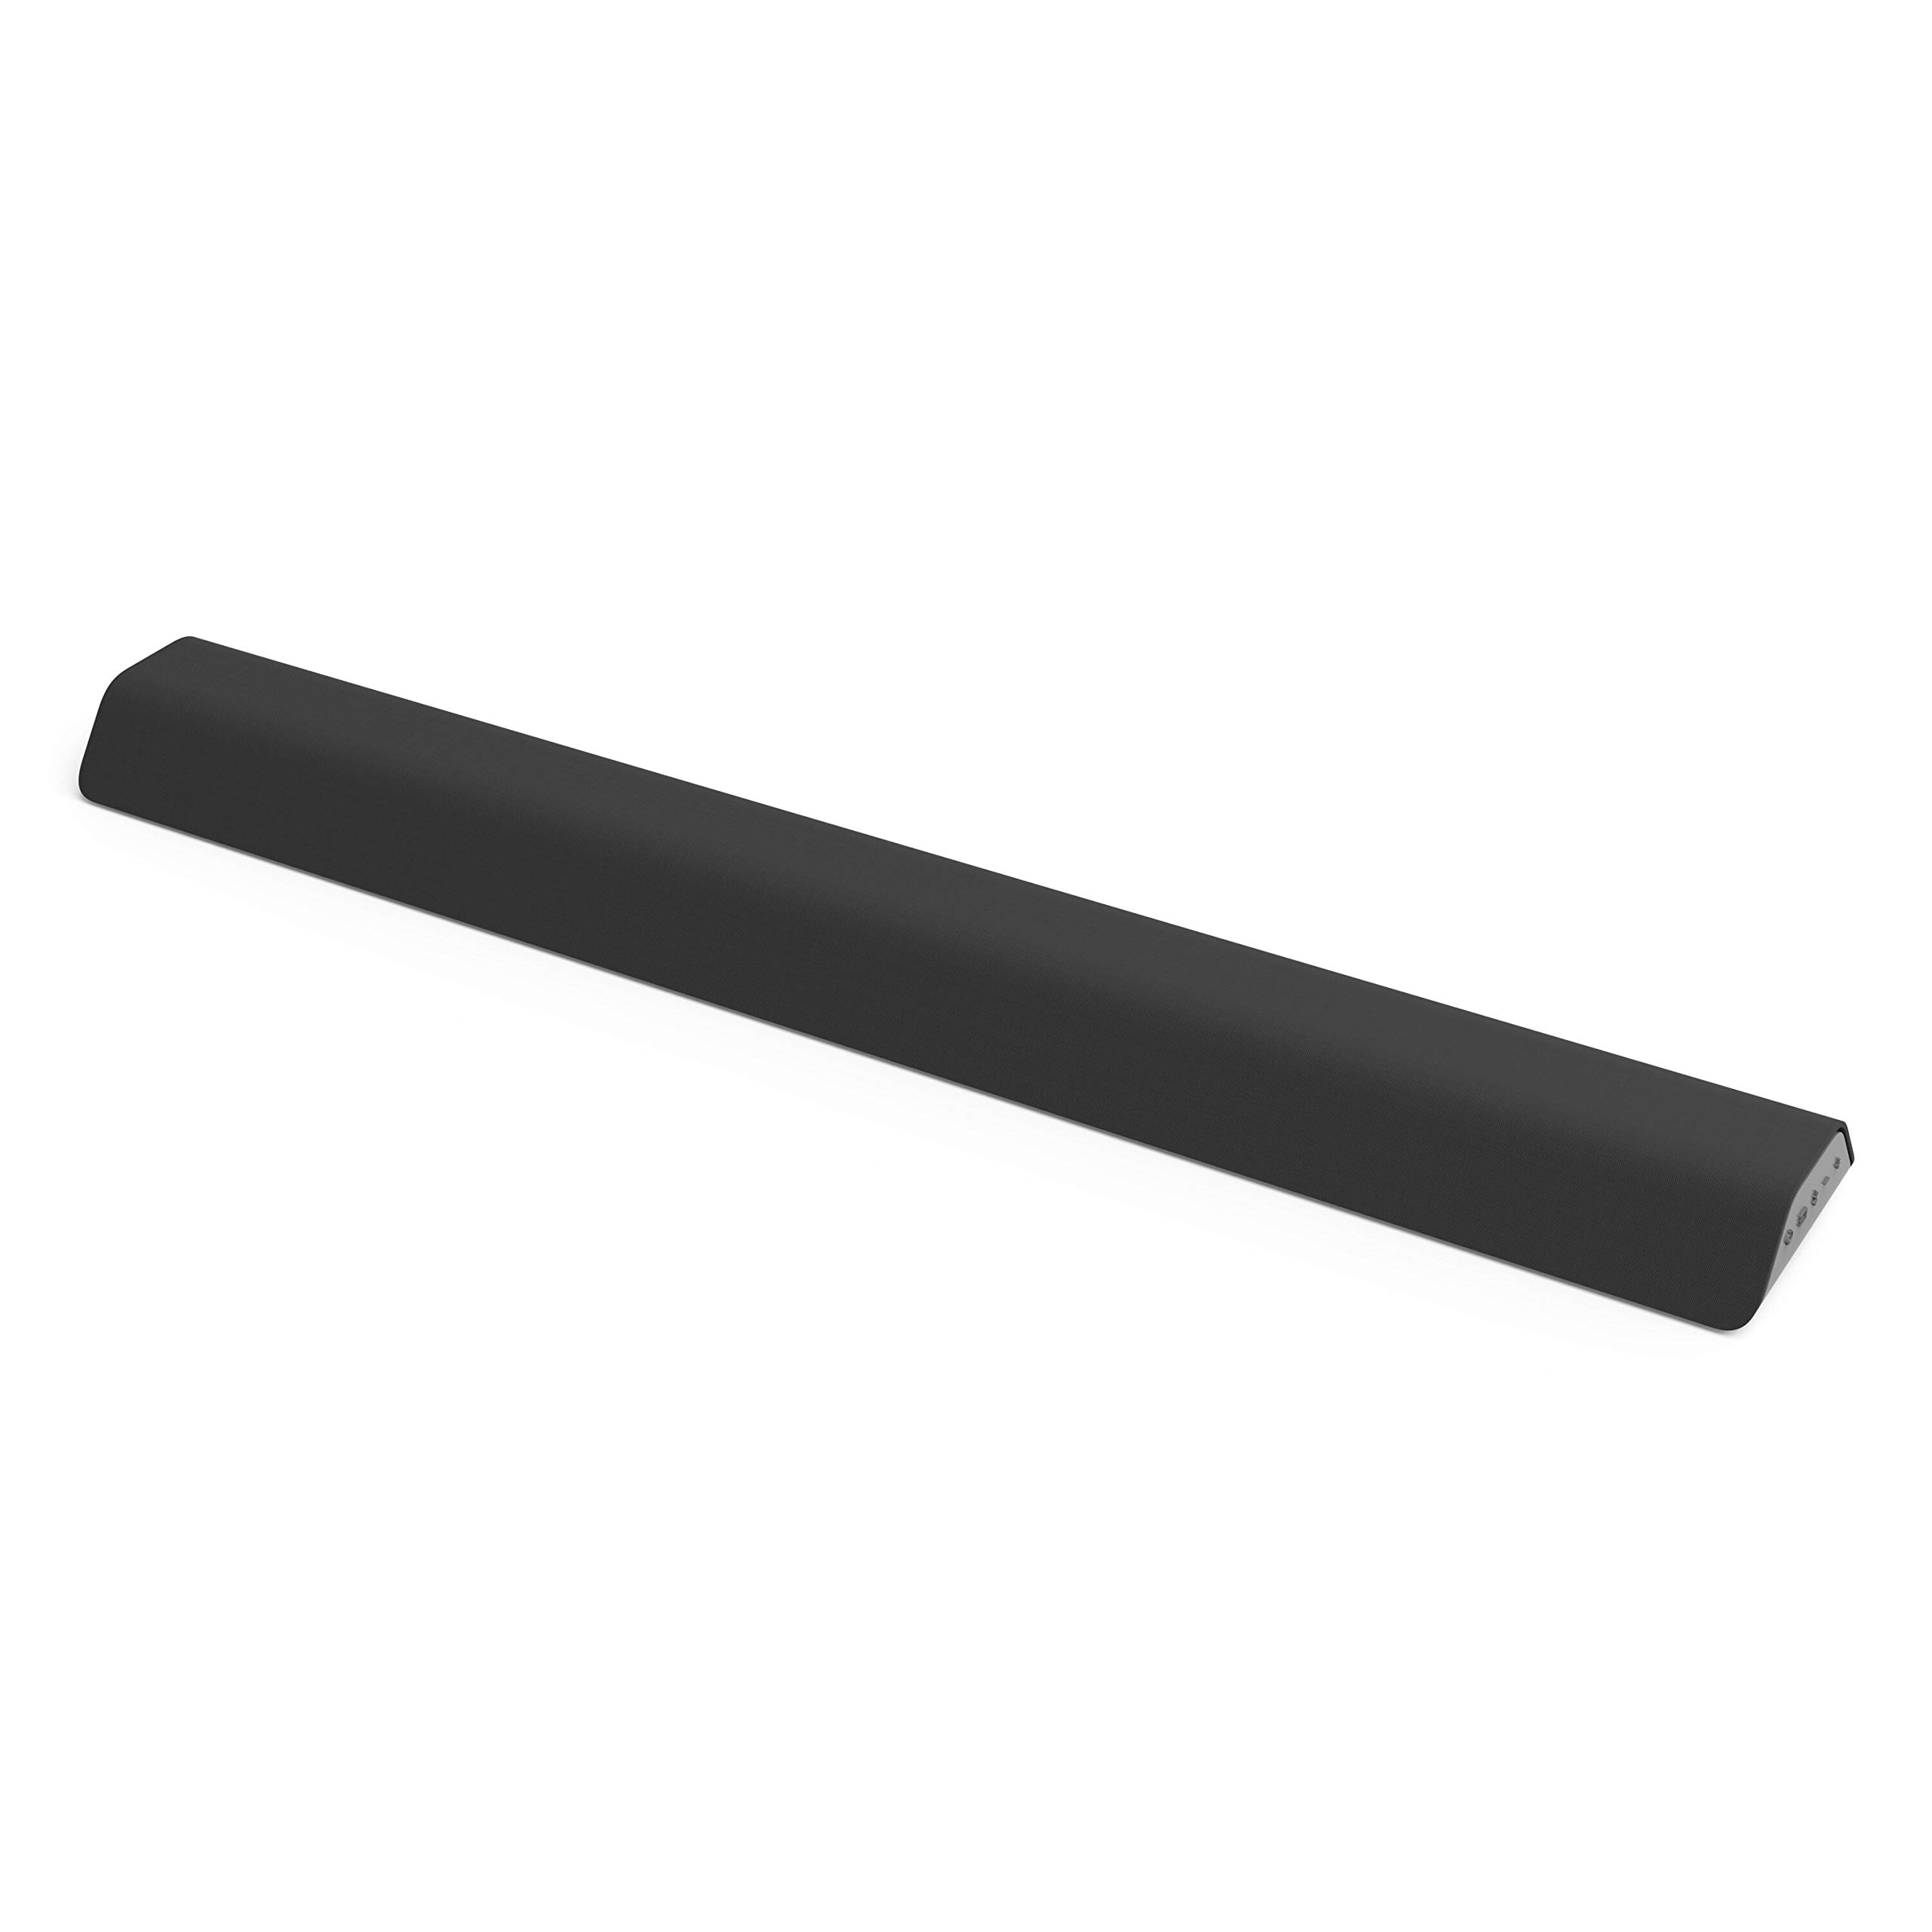 VIZIO, M-Series 36” Surround Sound System for TV, 2.1 Channel Home Audio Sound Bar with Built-in Subwoofers and Bluetooth – 4 M21d-H8R